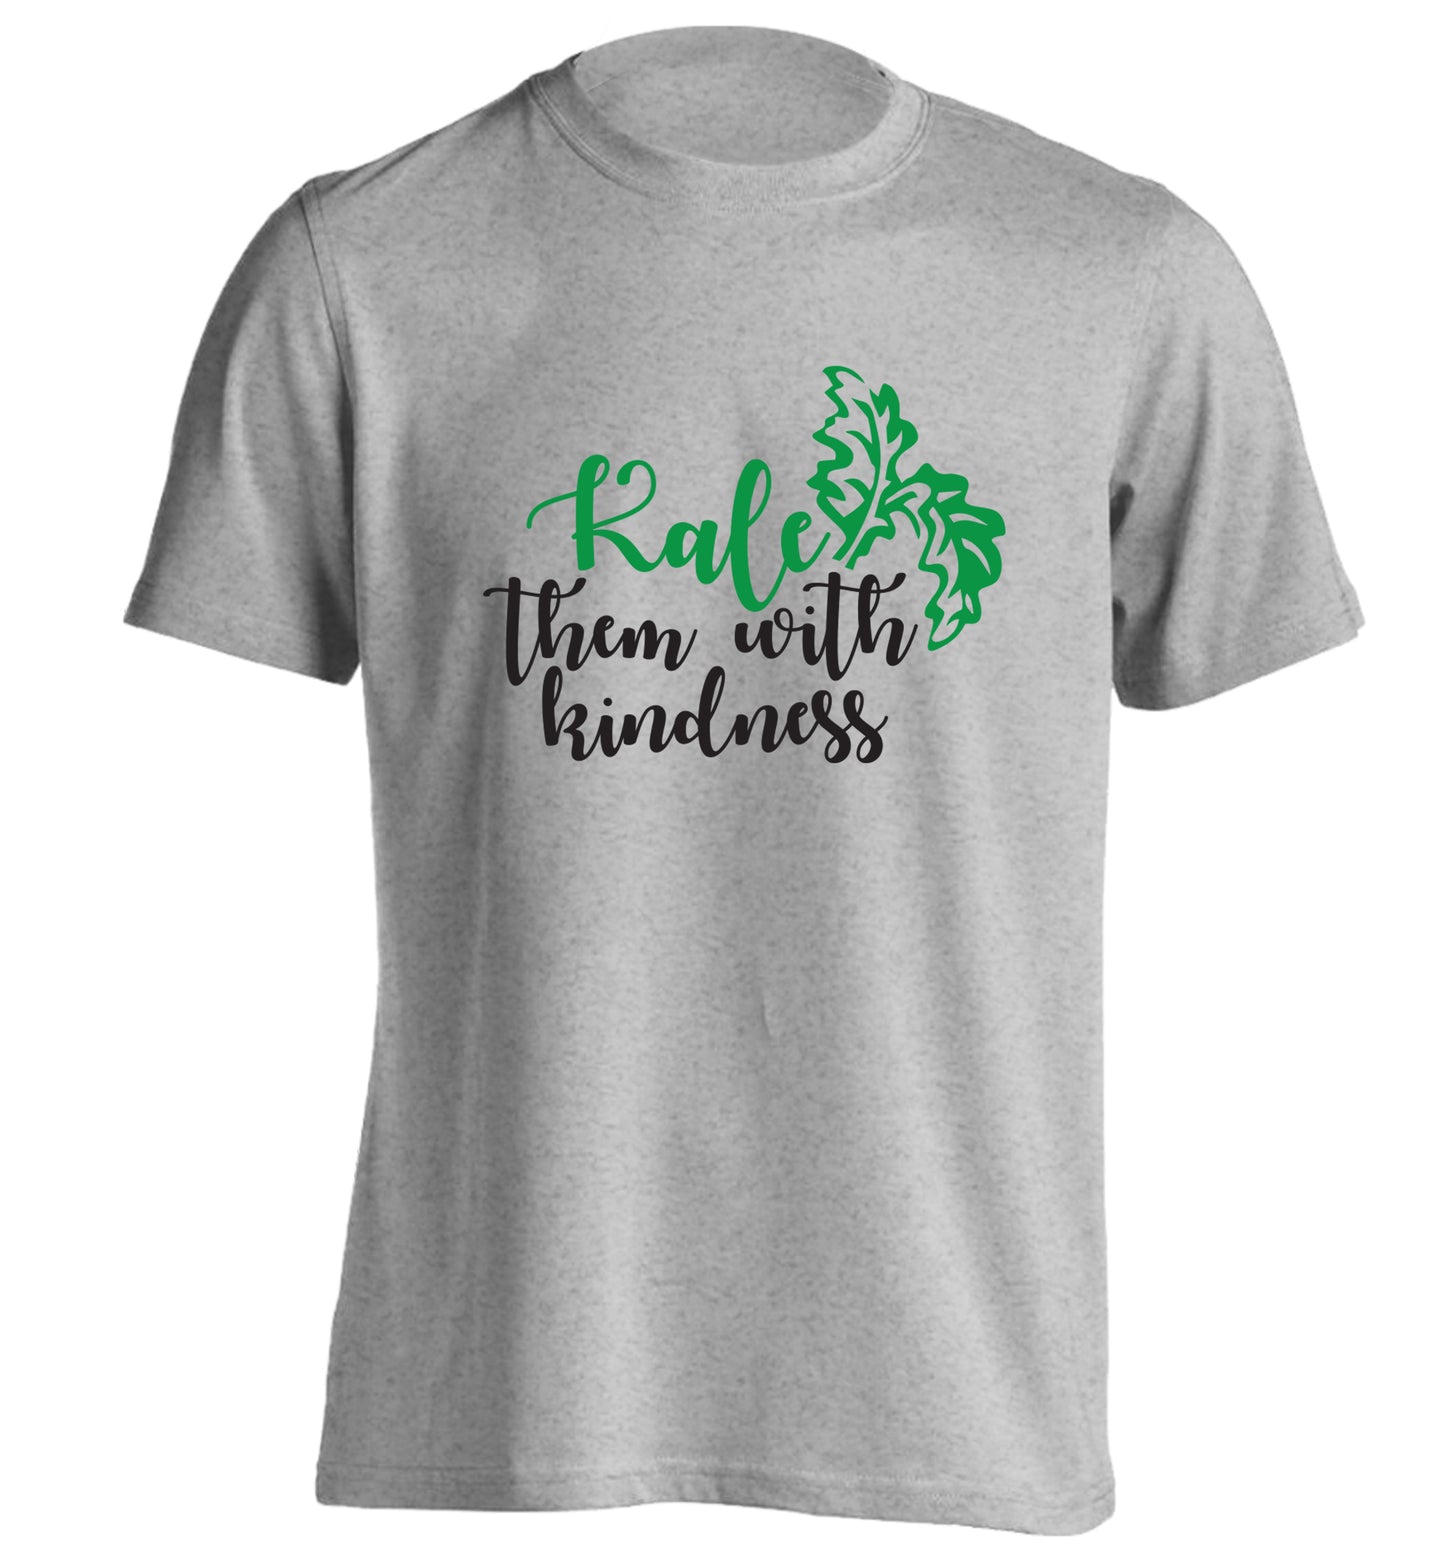 Kale them with kindness adults unisex grey Tshirt 2XL